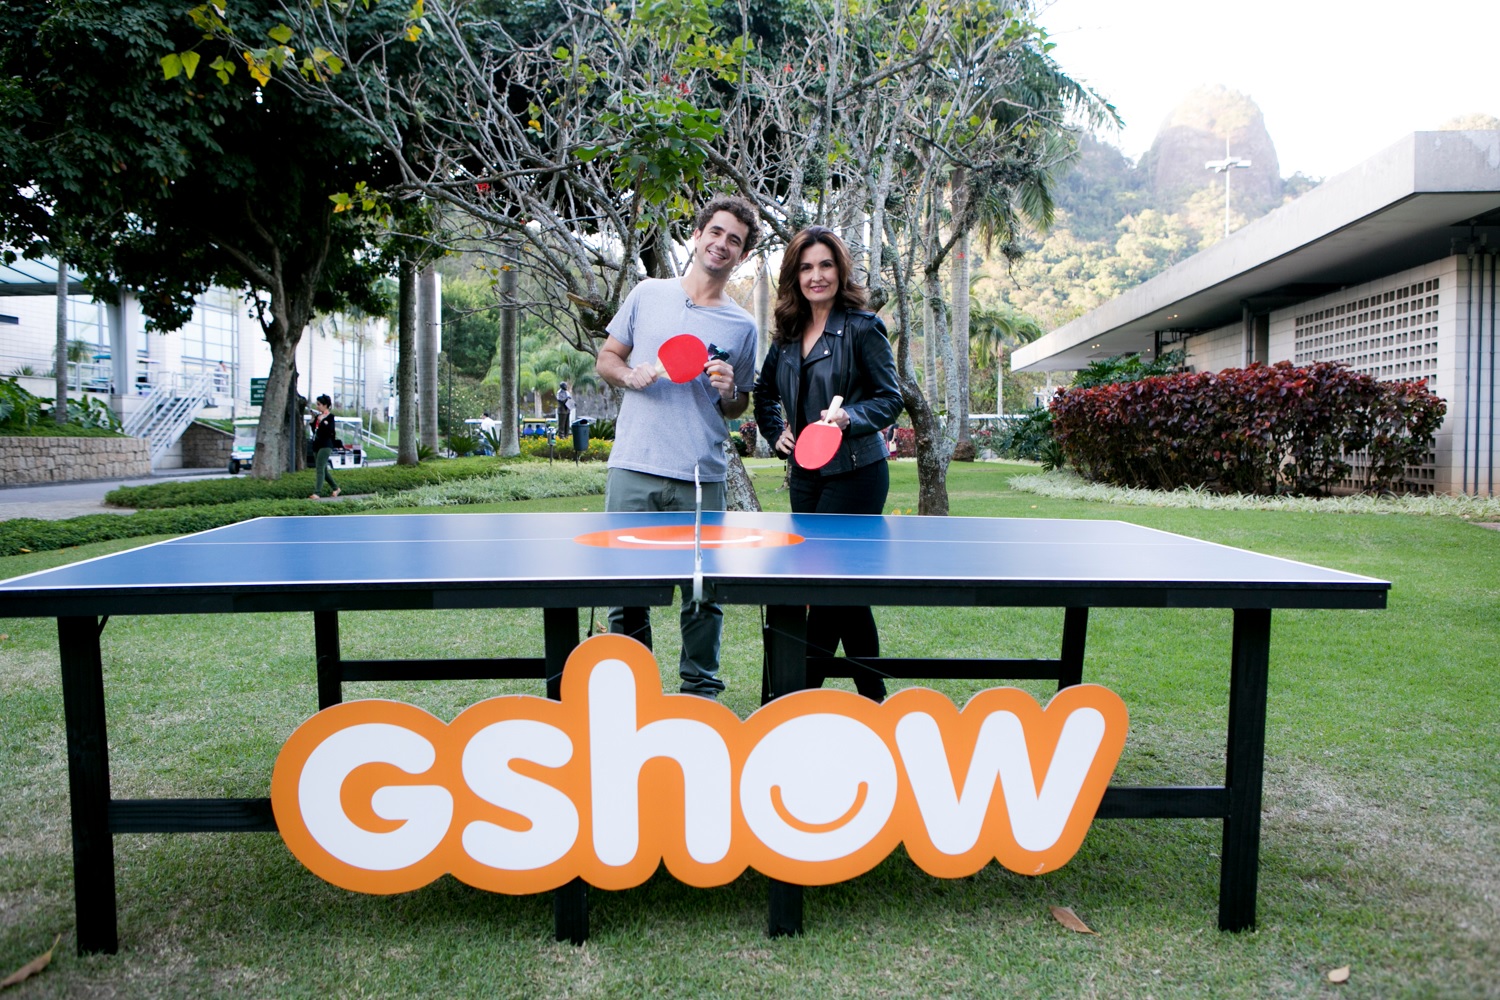 Gshow-Ping pong com Andreoli